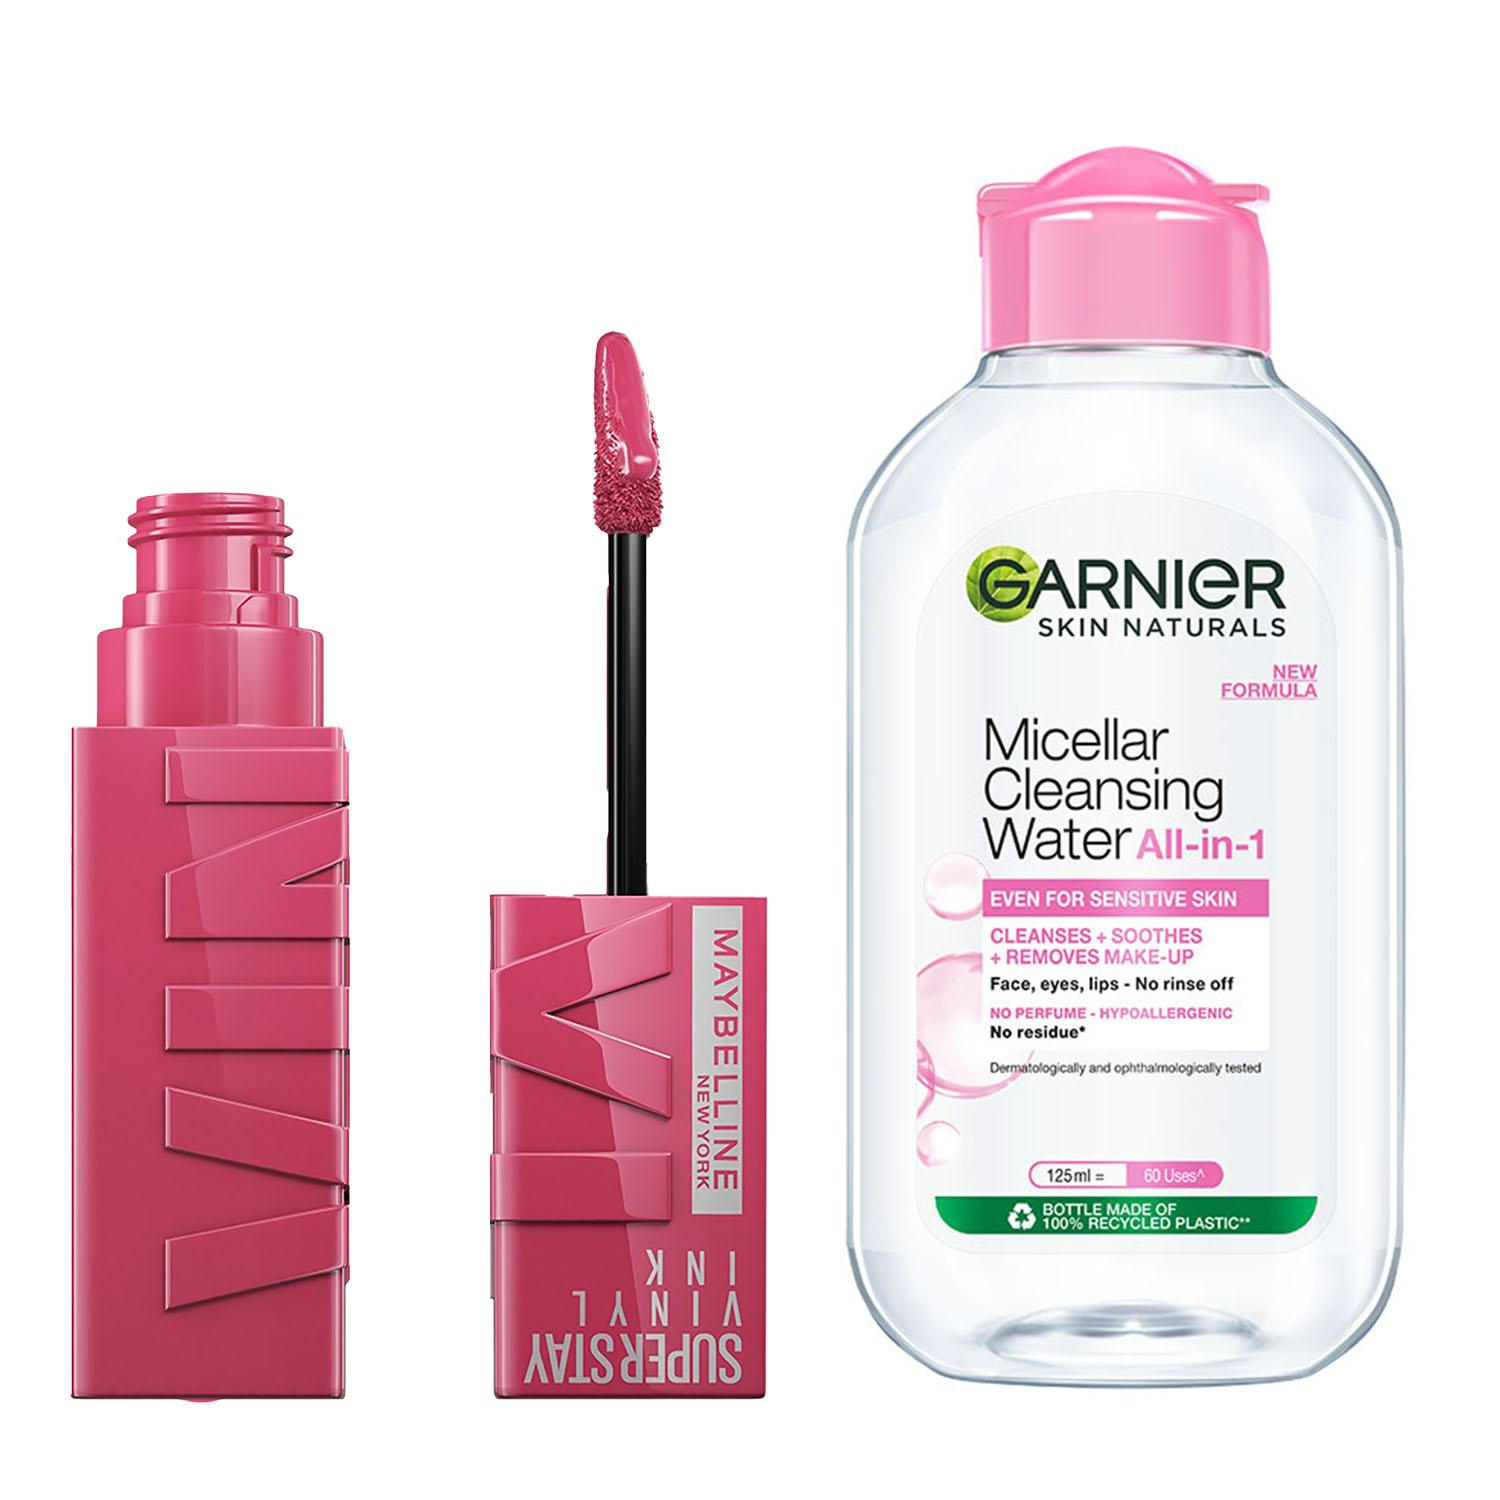 Maybelline Superstay Vinyl Ink Liquid Lipstick, Coy with Garnier Micellar Cleansing Water Combo